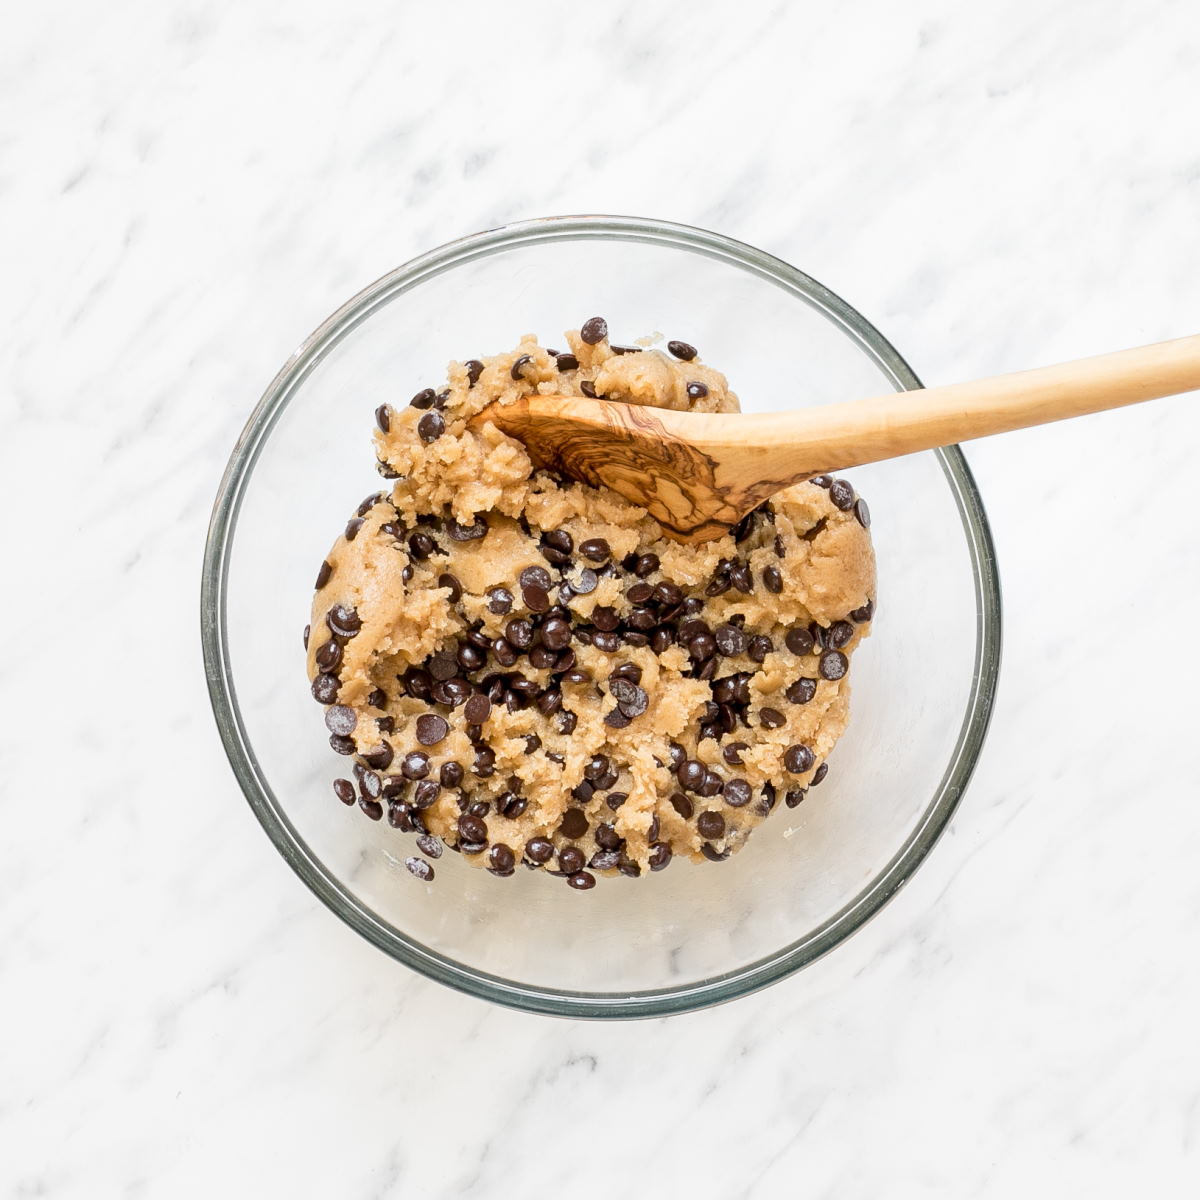 A glass bowl with light brown cookie batter with lots of chocolate chips.